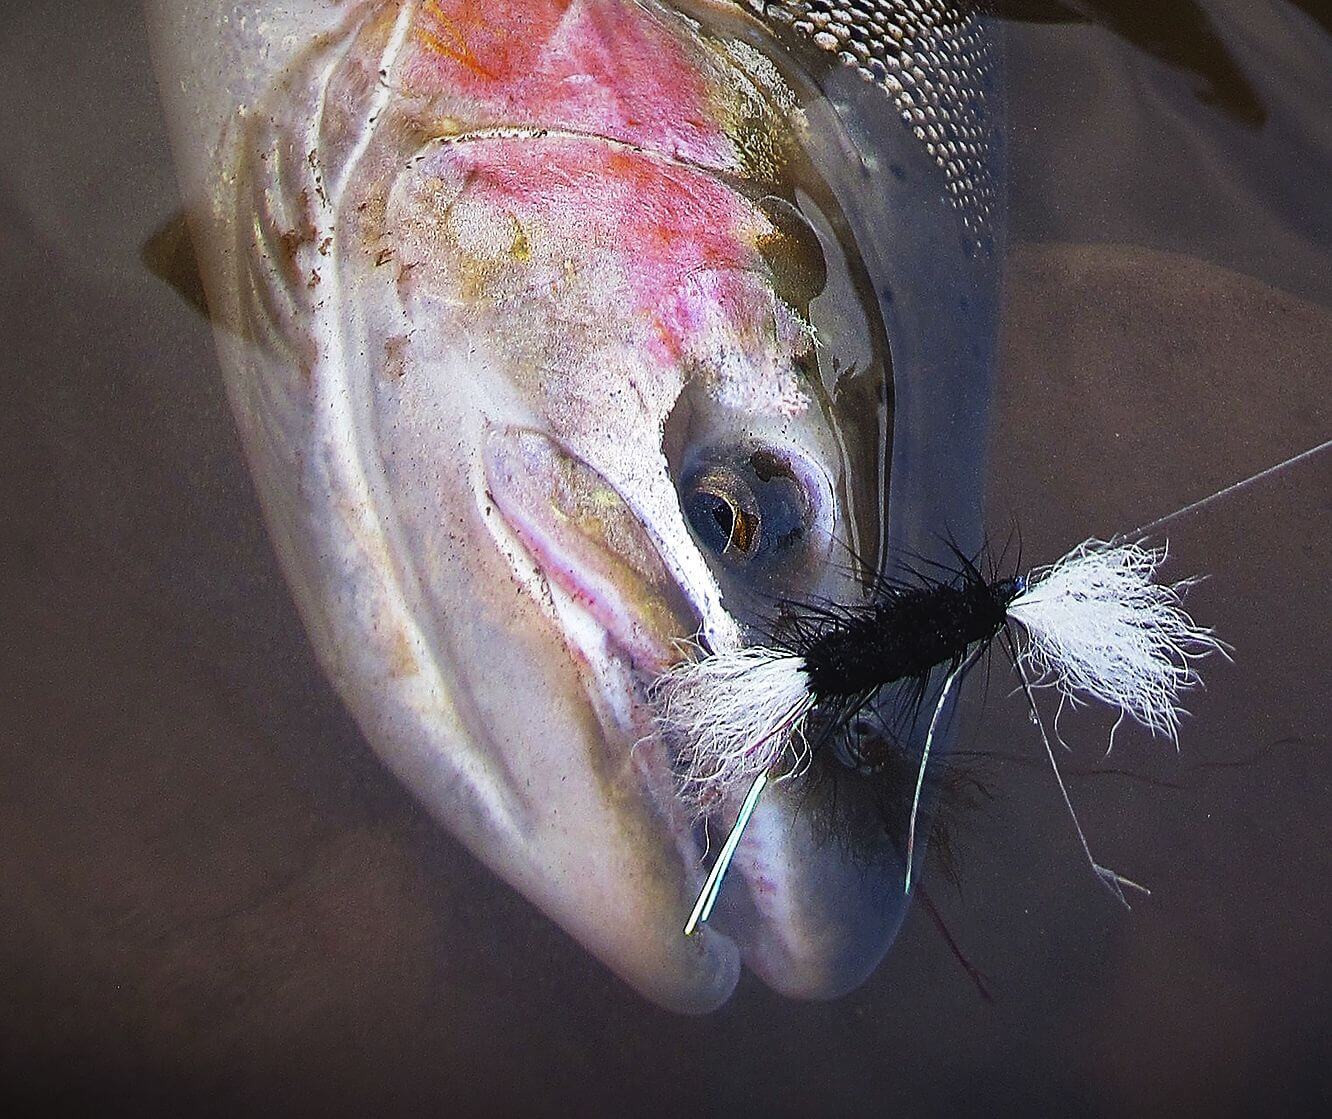 Salmon Stringer Fly Tying Video  The Caddis Fly: Oregon Fly Fishing Blog